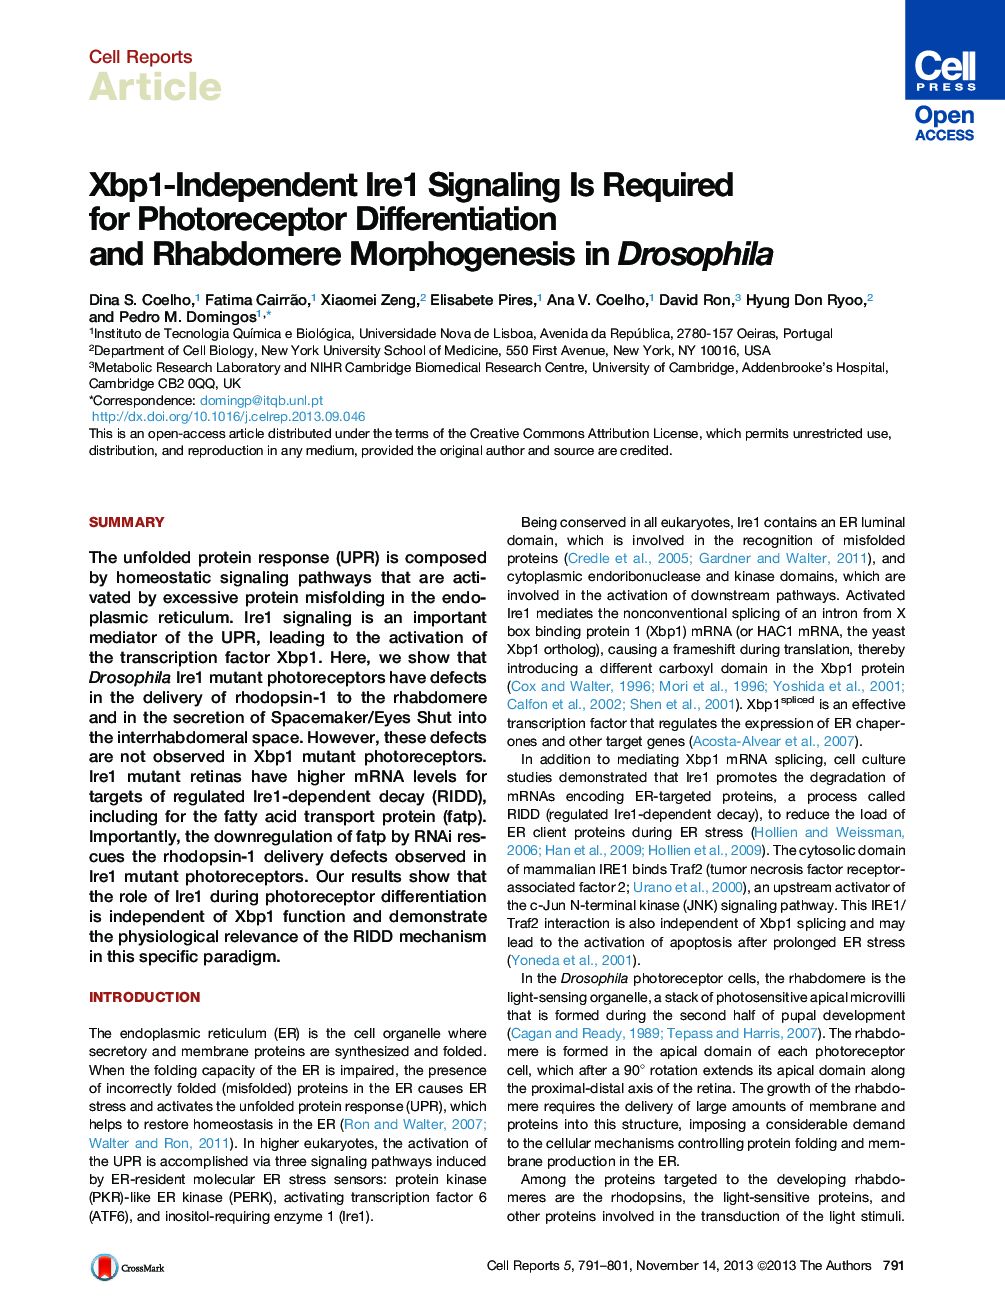 Xbp1-Independent Ire1 Signaling Is Required for Photoreceptor Differentiation and Rhabdomere Morphogenesis in Drosophila 